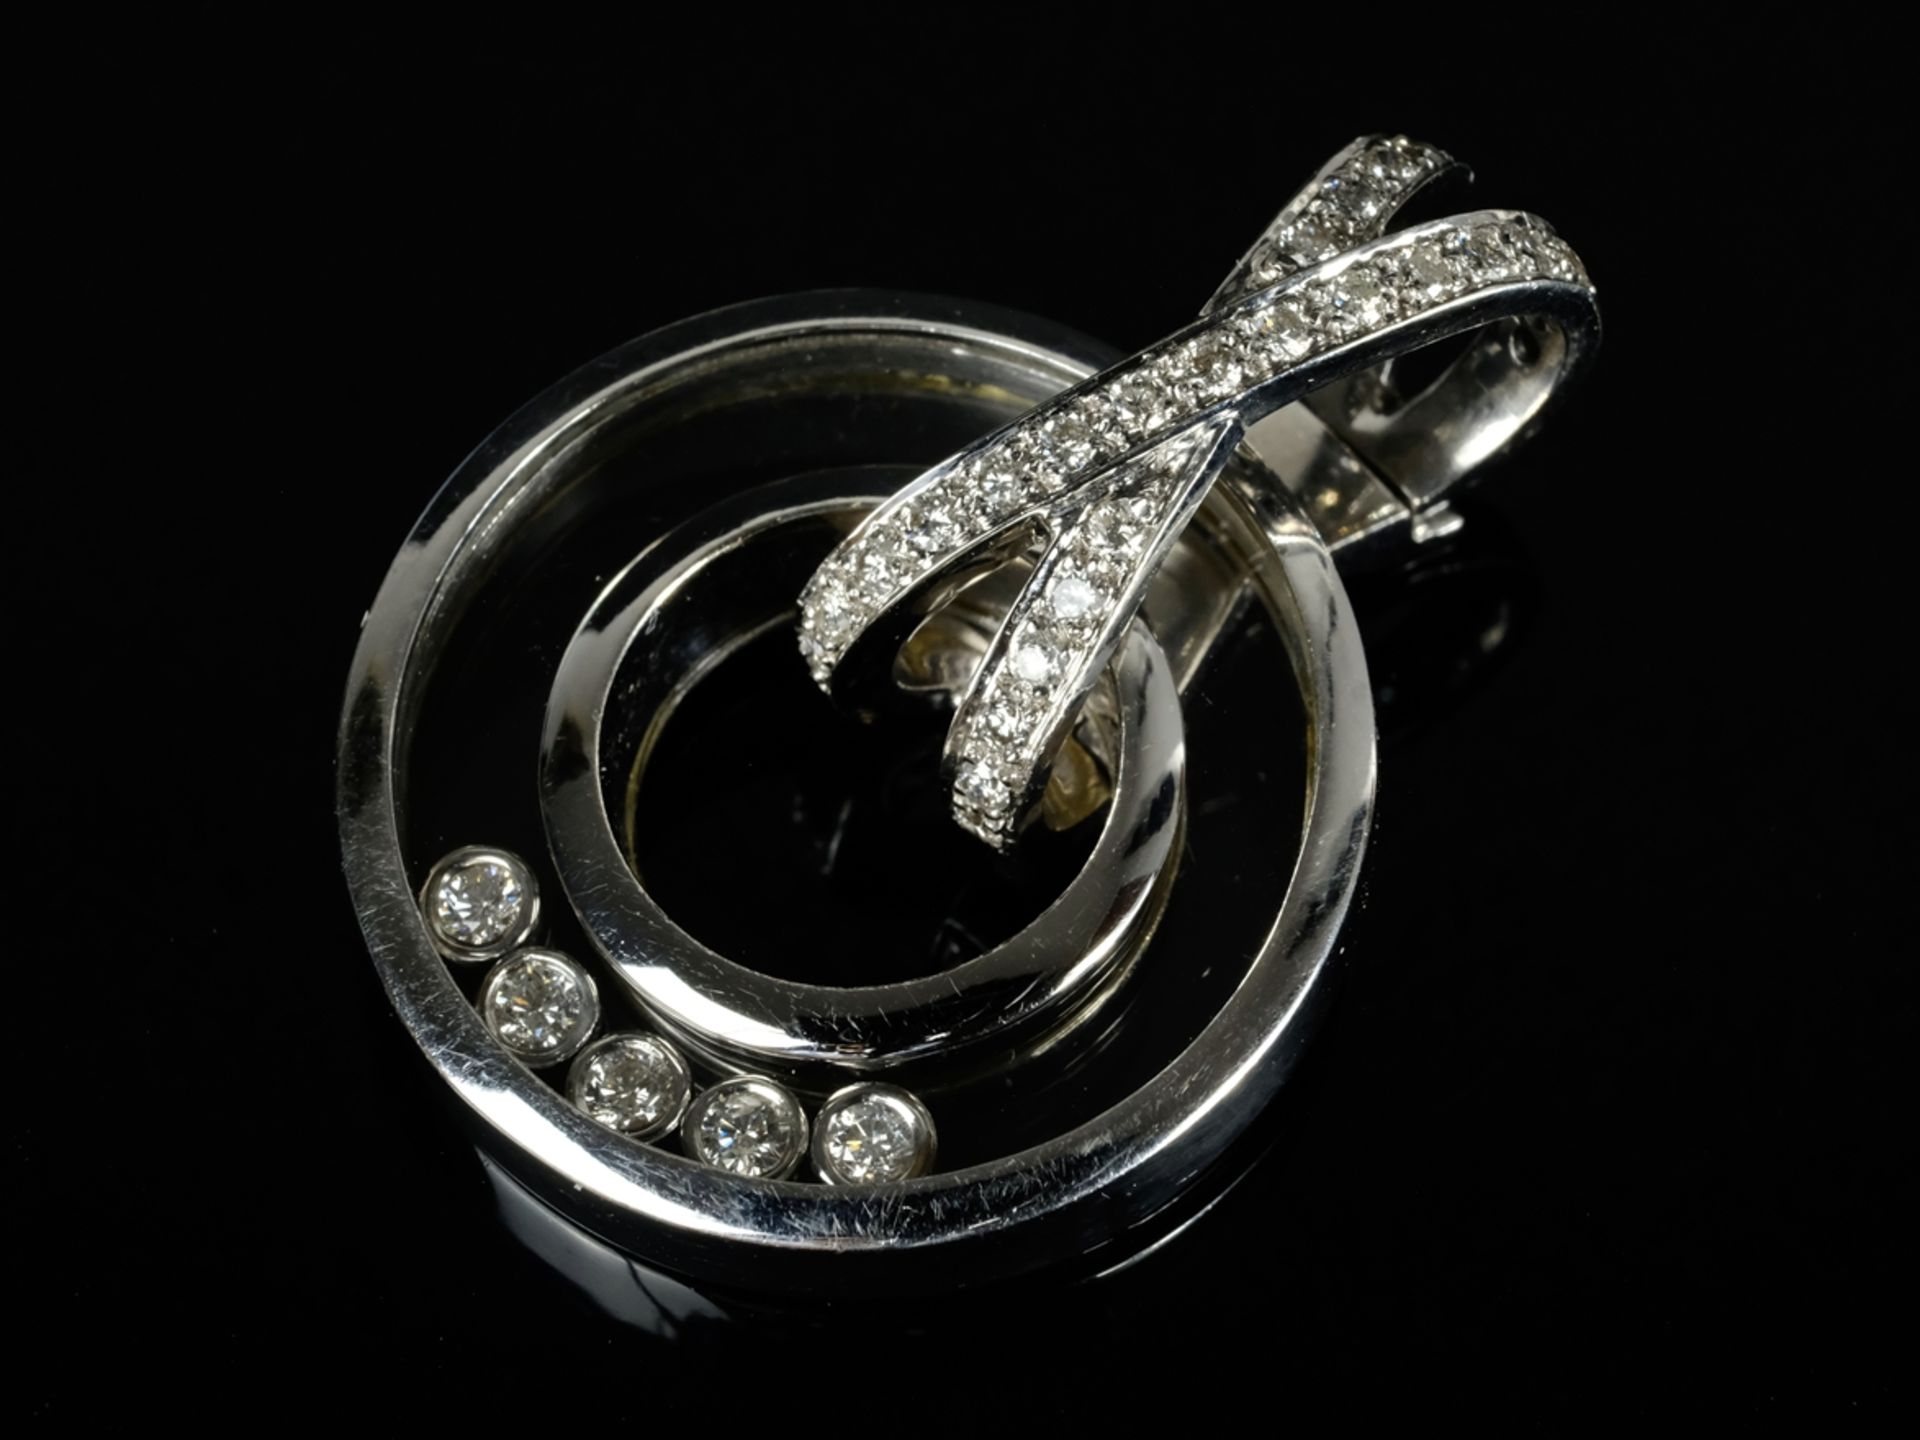 DESIGN pendant in the style of Chopard, loop pendant in X-shape (l 2.1cm), set with brilliants, can